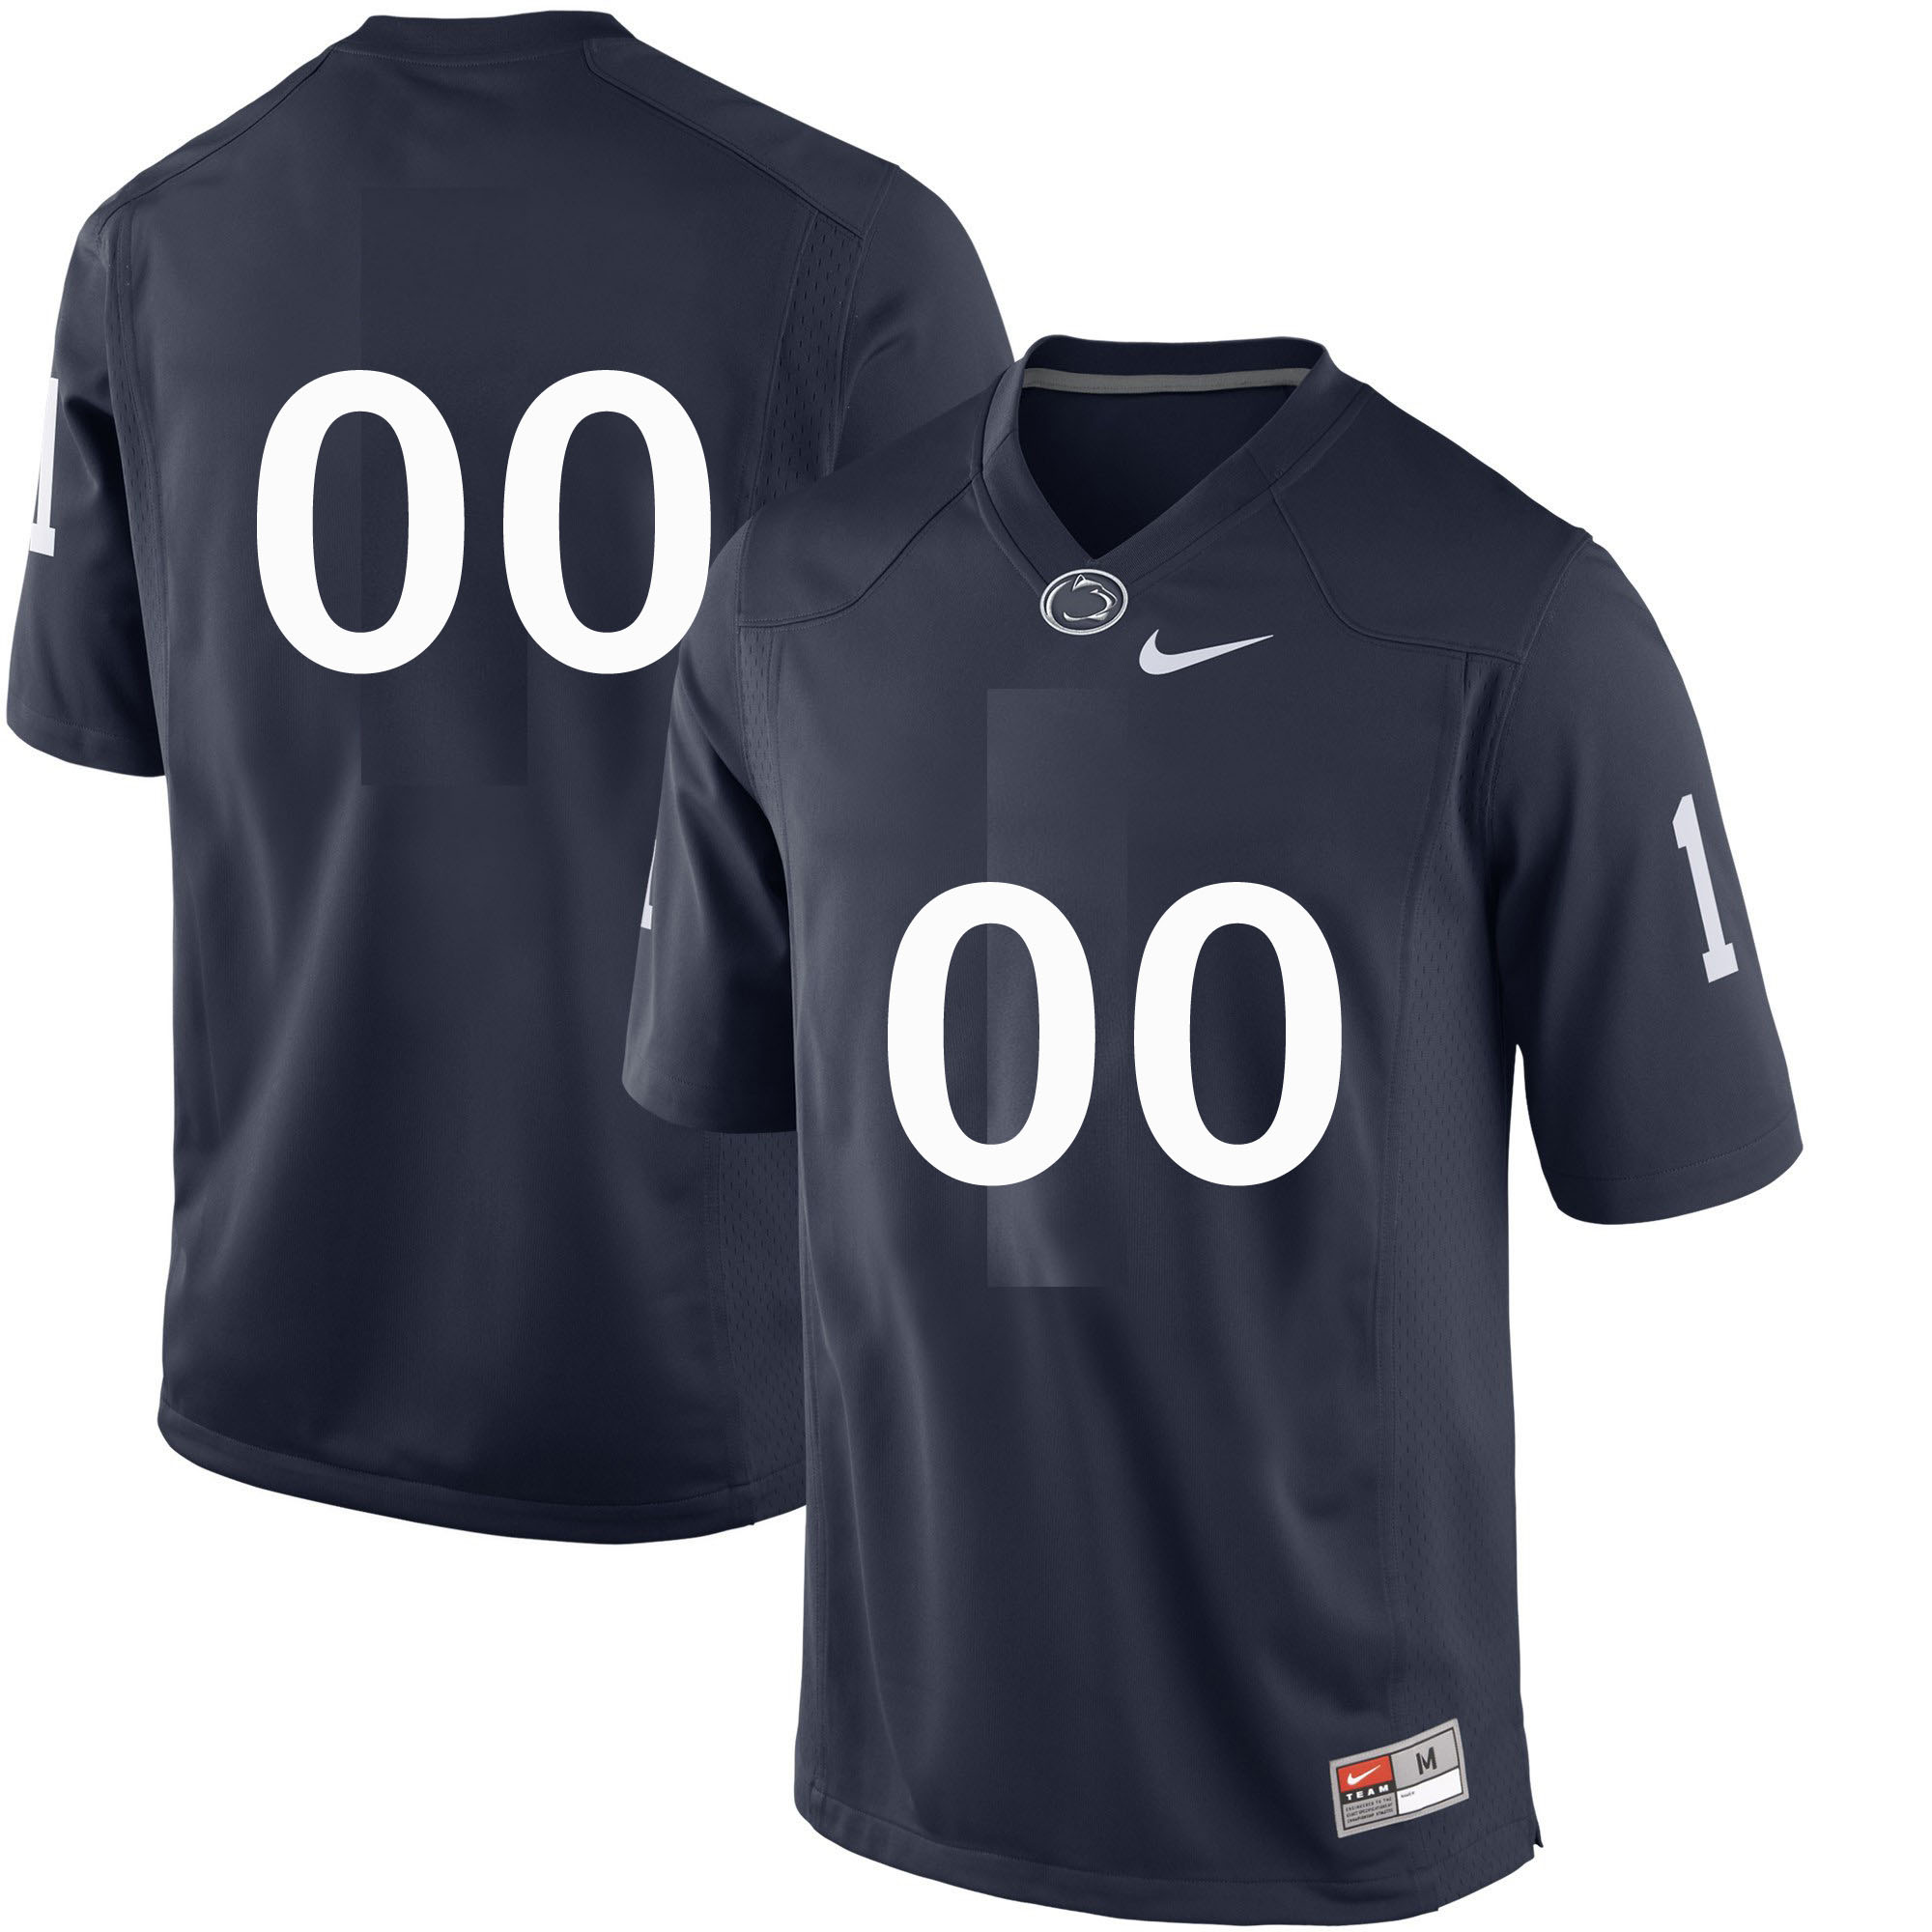 Customized NCAA Penn State Nittany Lions Navy Blue Nike College Football Jersey